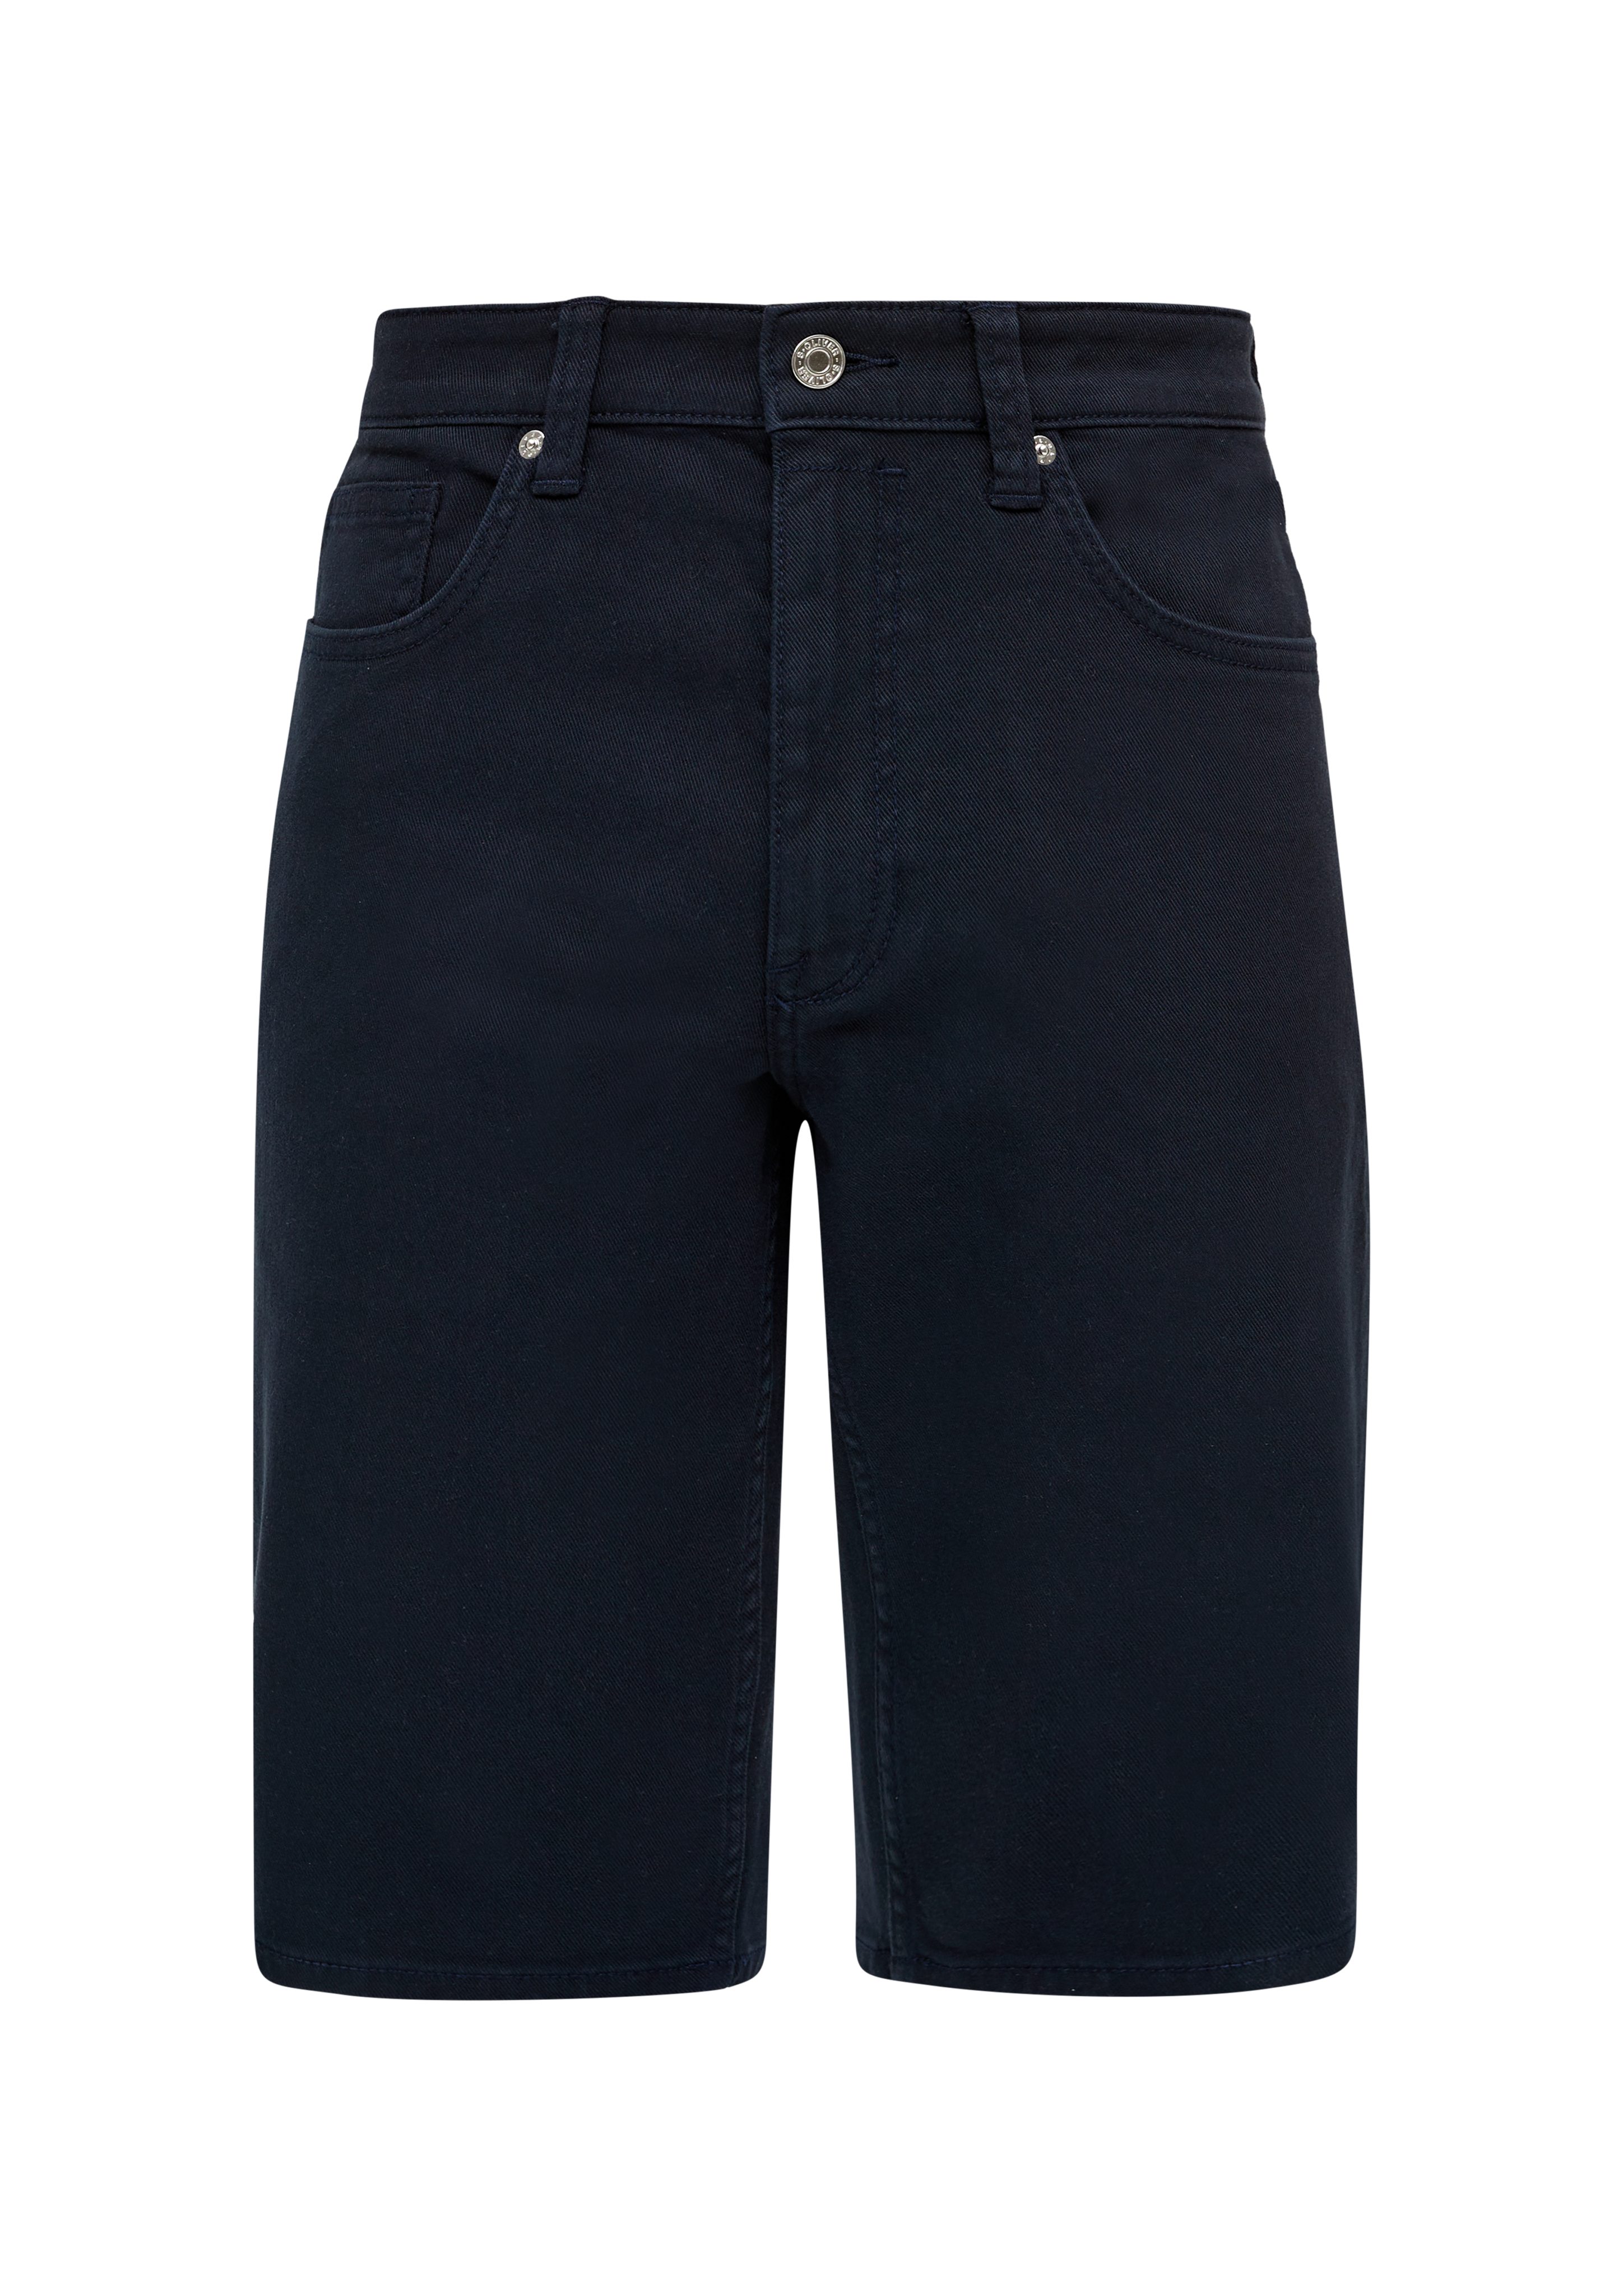 Straight High / s.Oliver Fit / Regular navy Jeans-Shorts / Rise Jeansshorts Label-Patch Leg